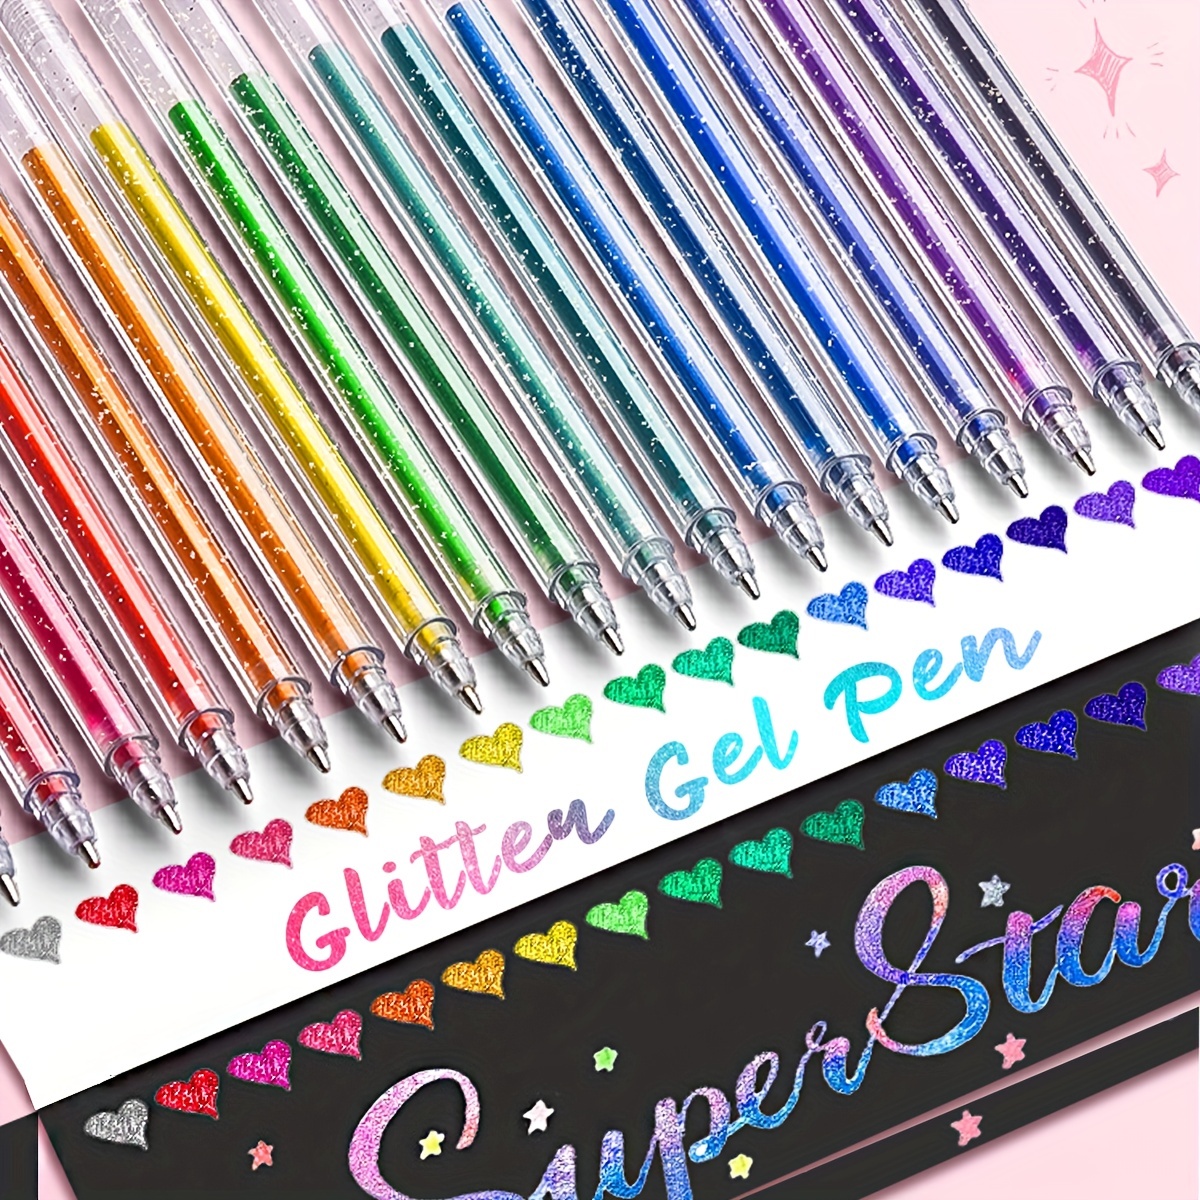 Gel Pens Coloring Sets Glitter - Free Shipping For New Users